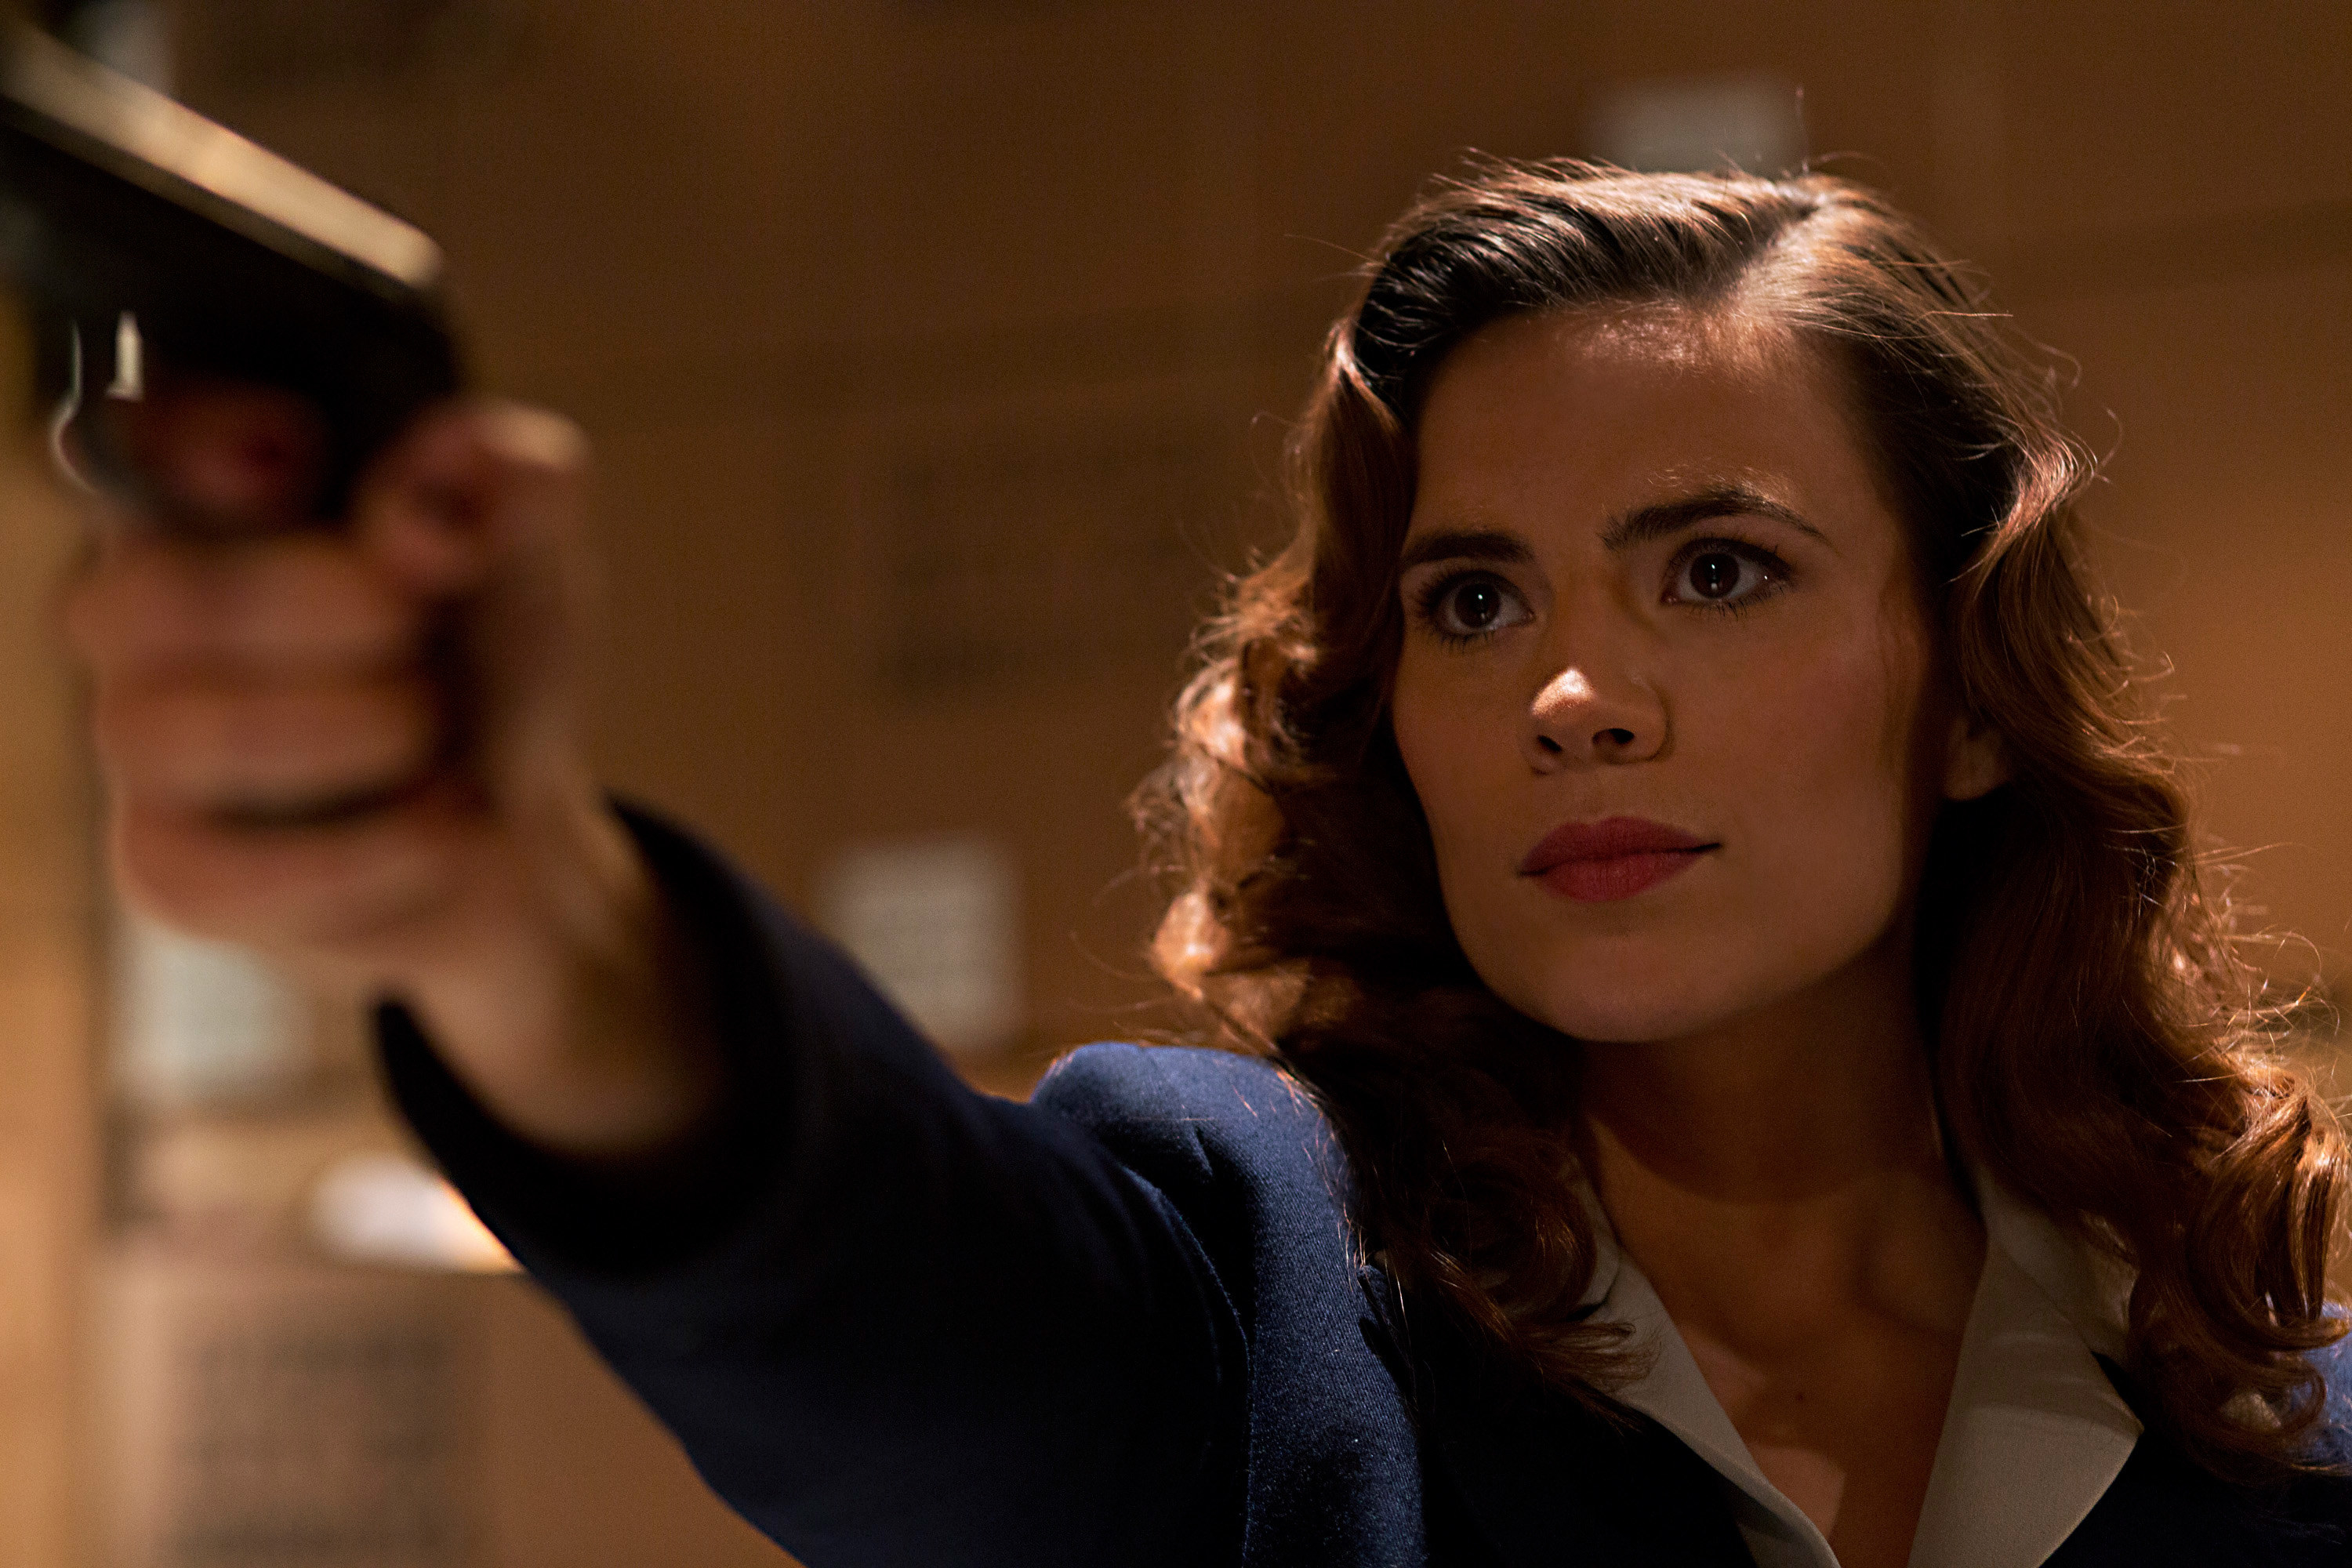 Hayley Atwell pointing a gun as Agent Carter